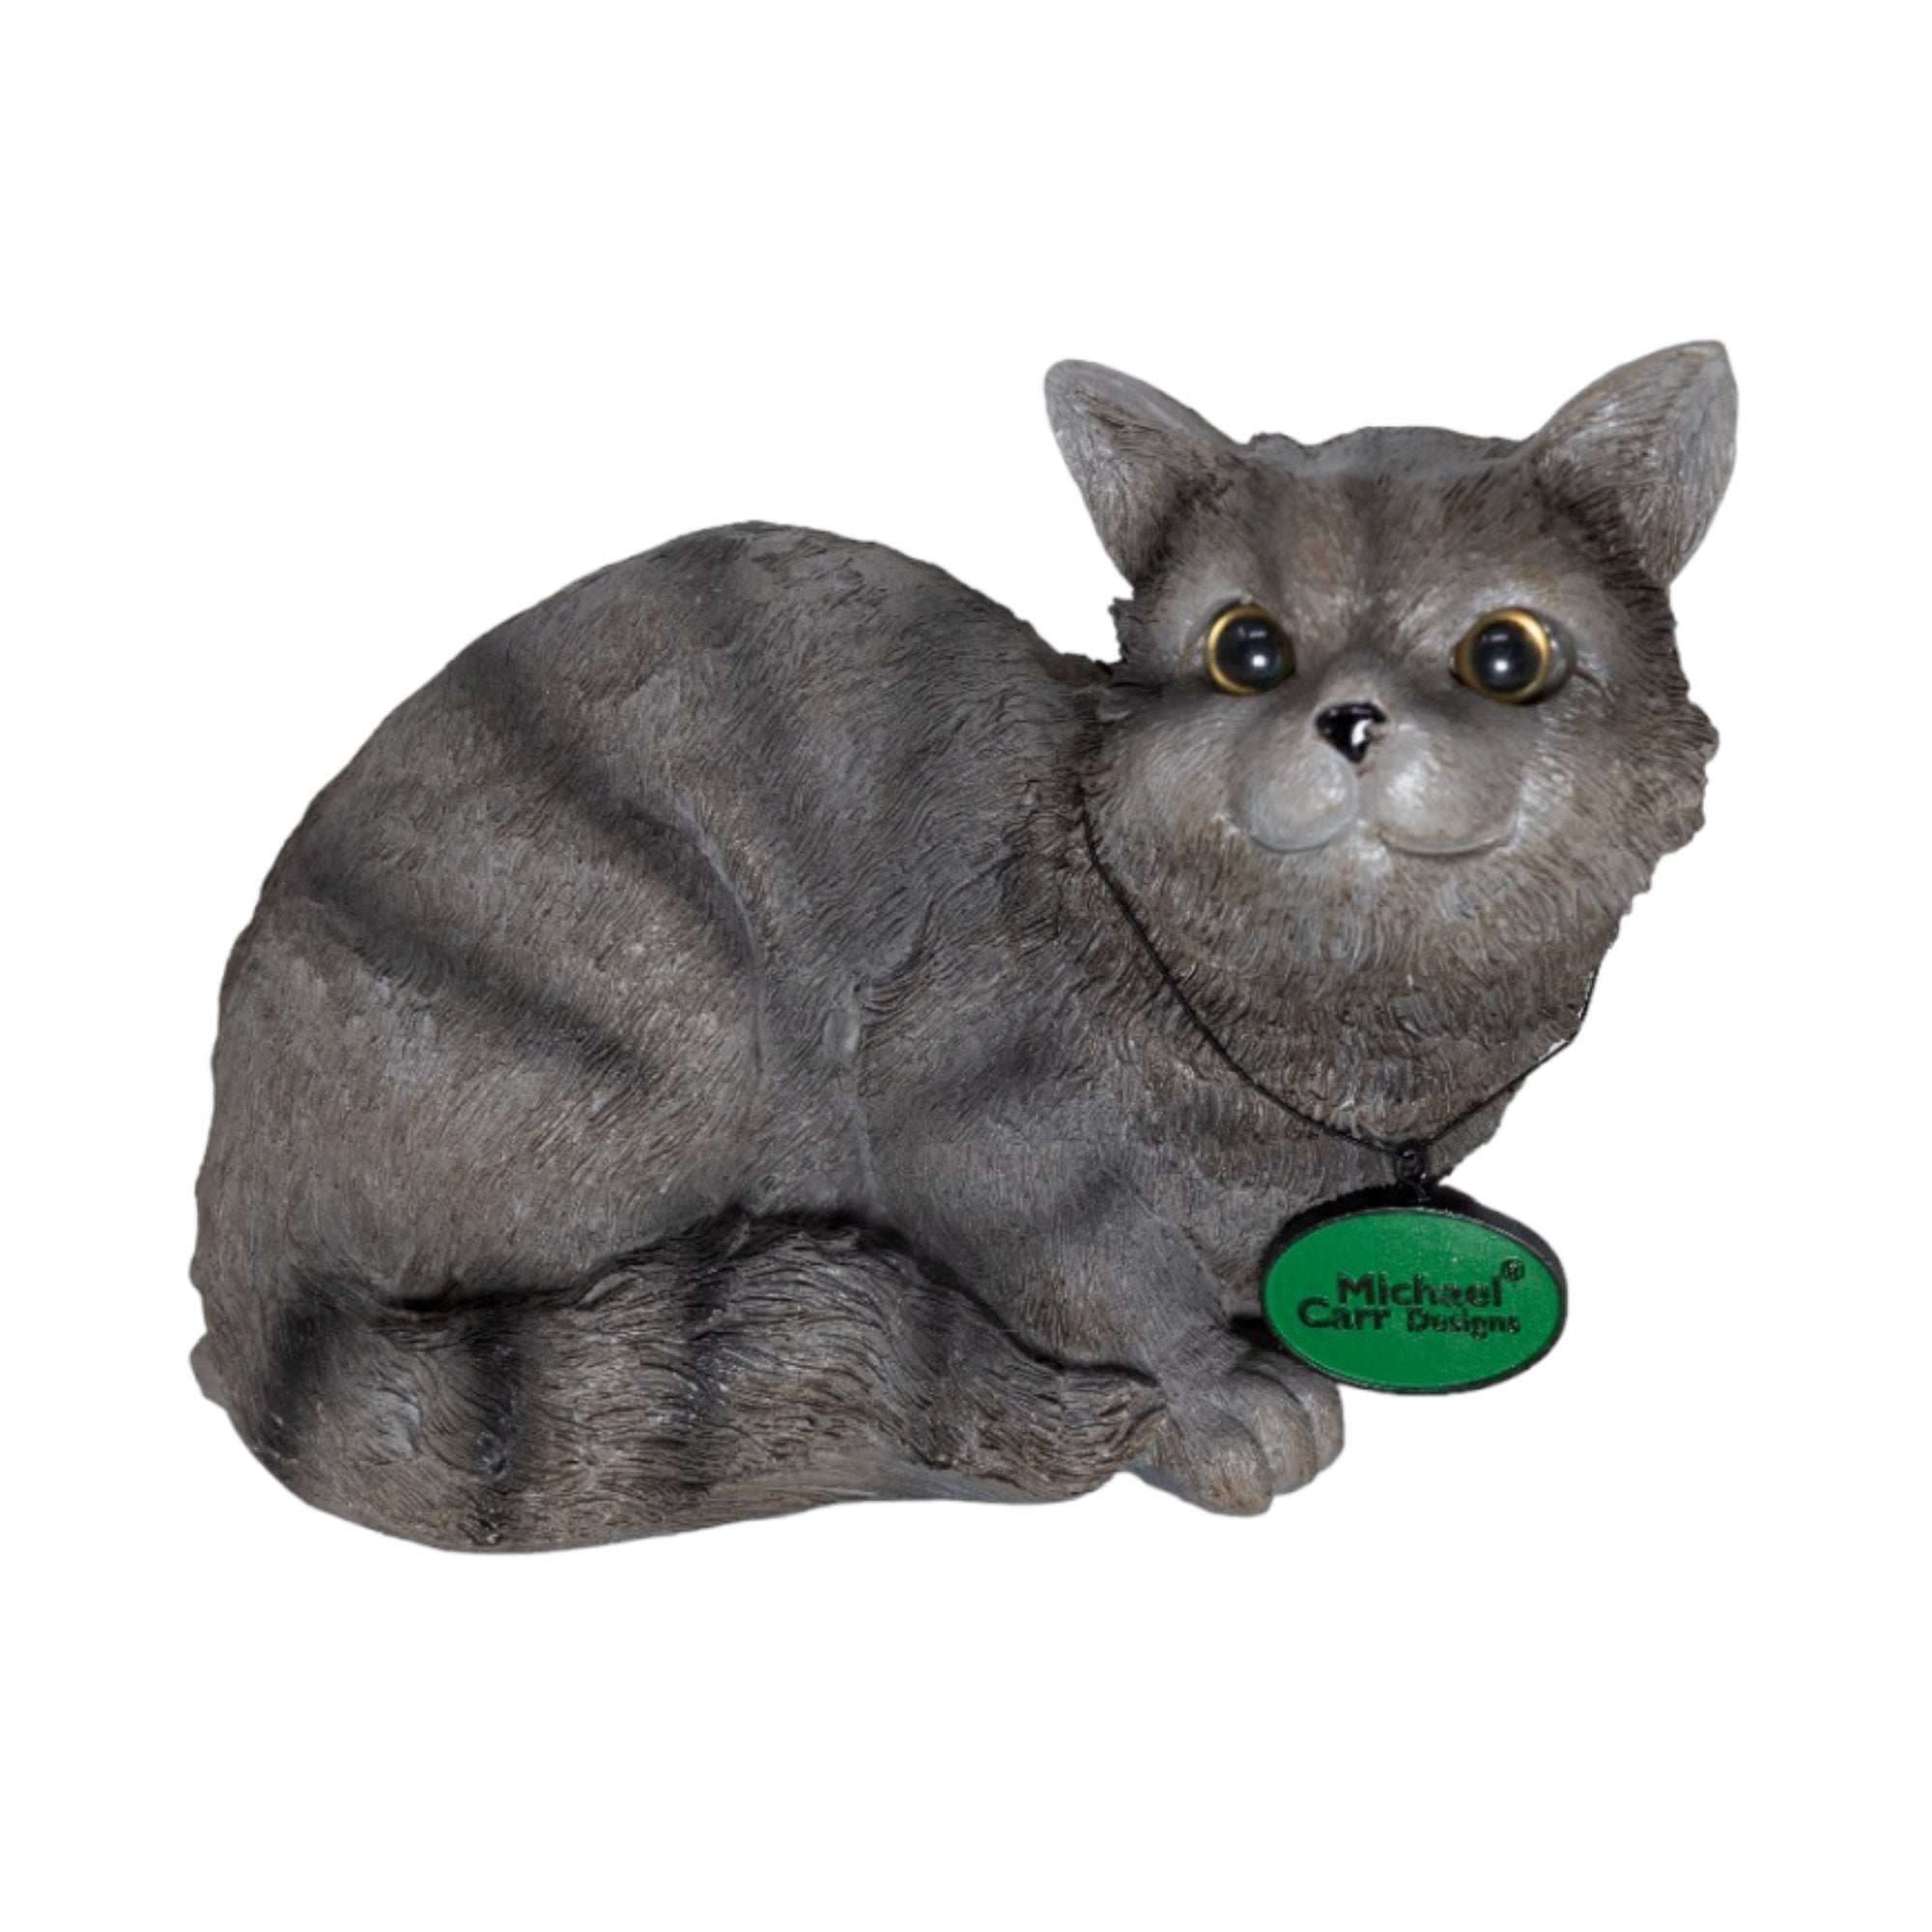 Michael Carr Designs Figurine for Garden and Lawns, Cat Sitting, Tiger Gray